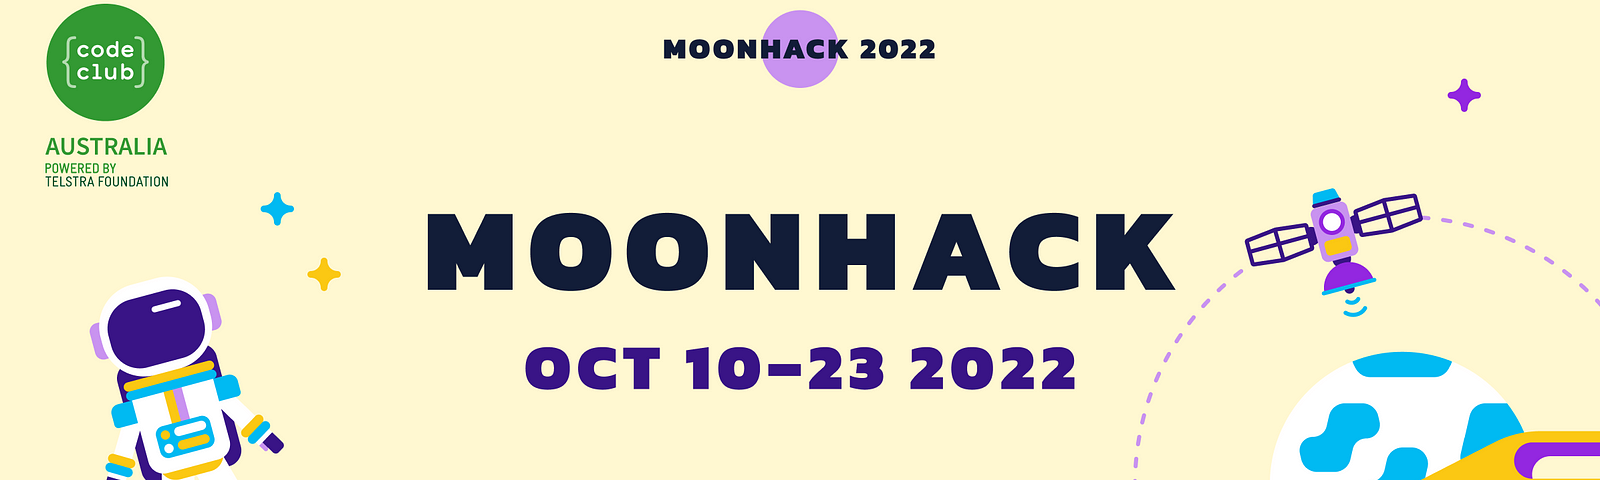 Moonhack will run from October 10 to 23.